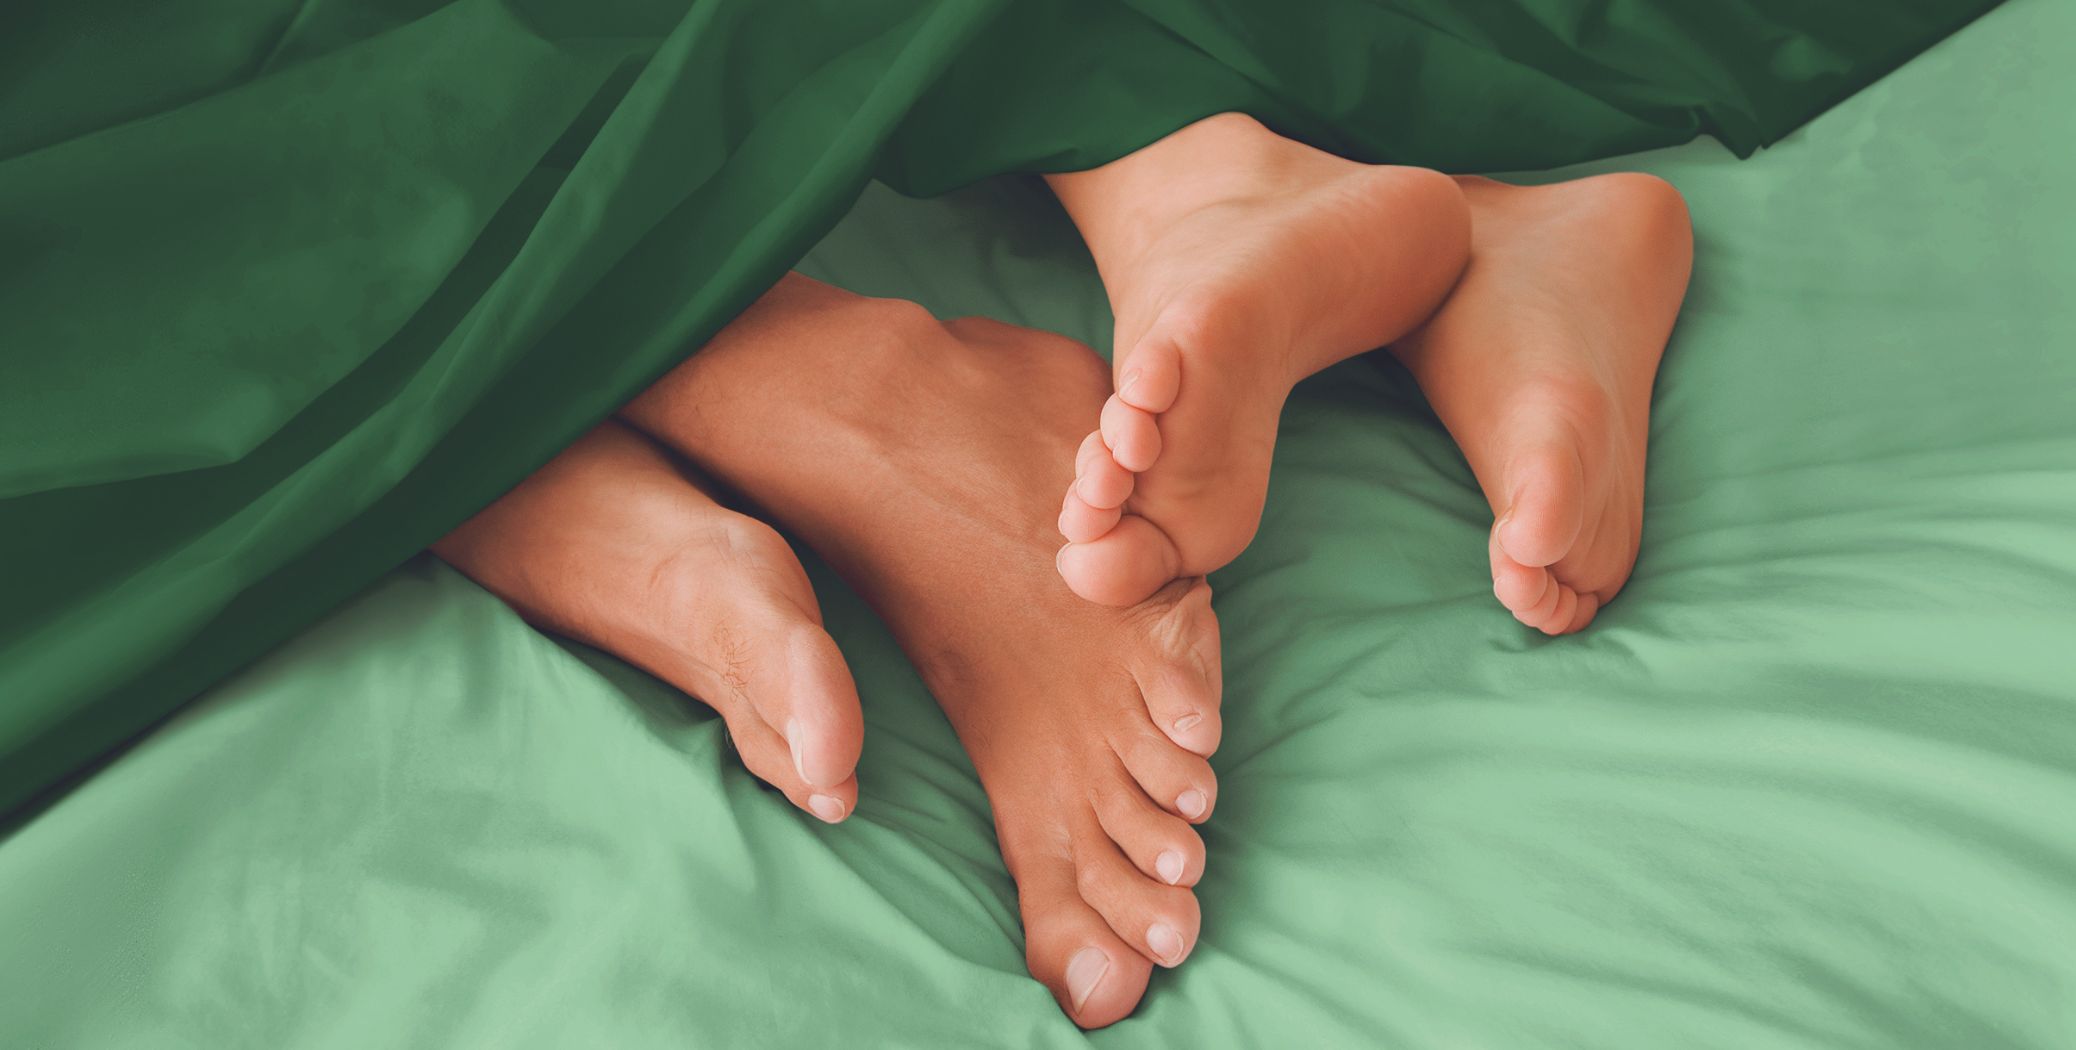 Couple in bed, feet showing under covers